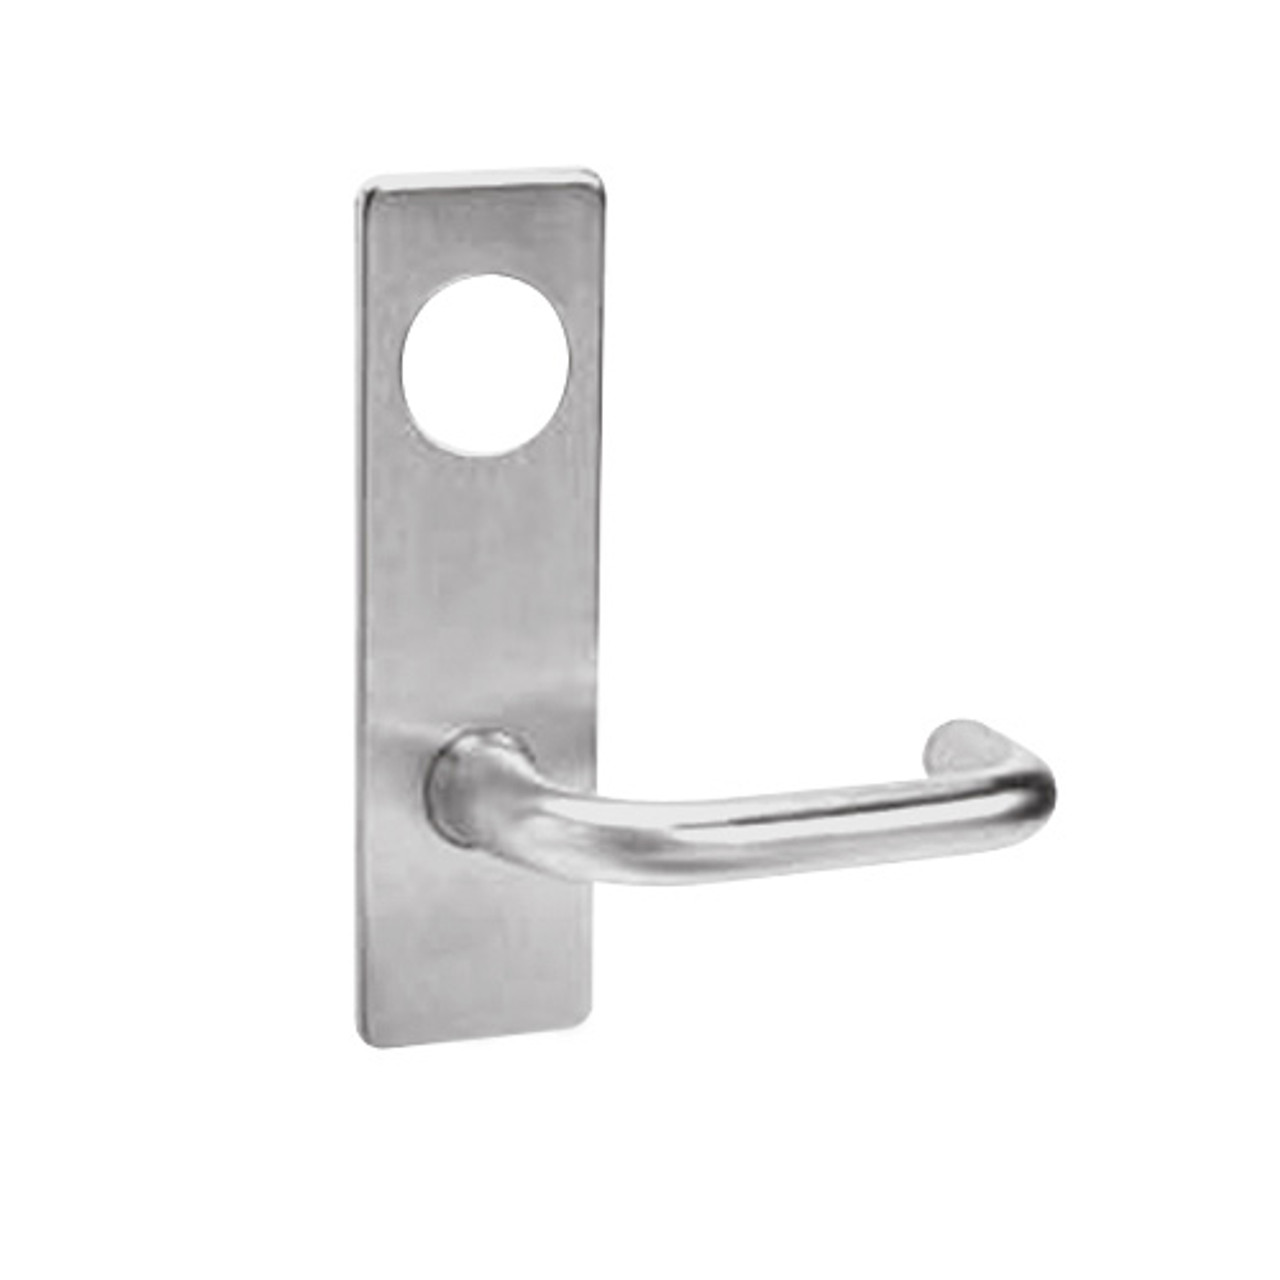 ML2048-LWM-630-CL6 Corbin Russwin ML2000 Series IC 6-Pin Less Core Mortise Entrance Locksets with Lustra Lever in Satin Stainless